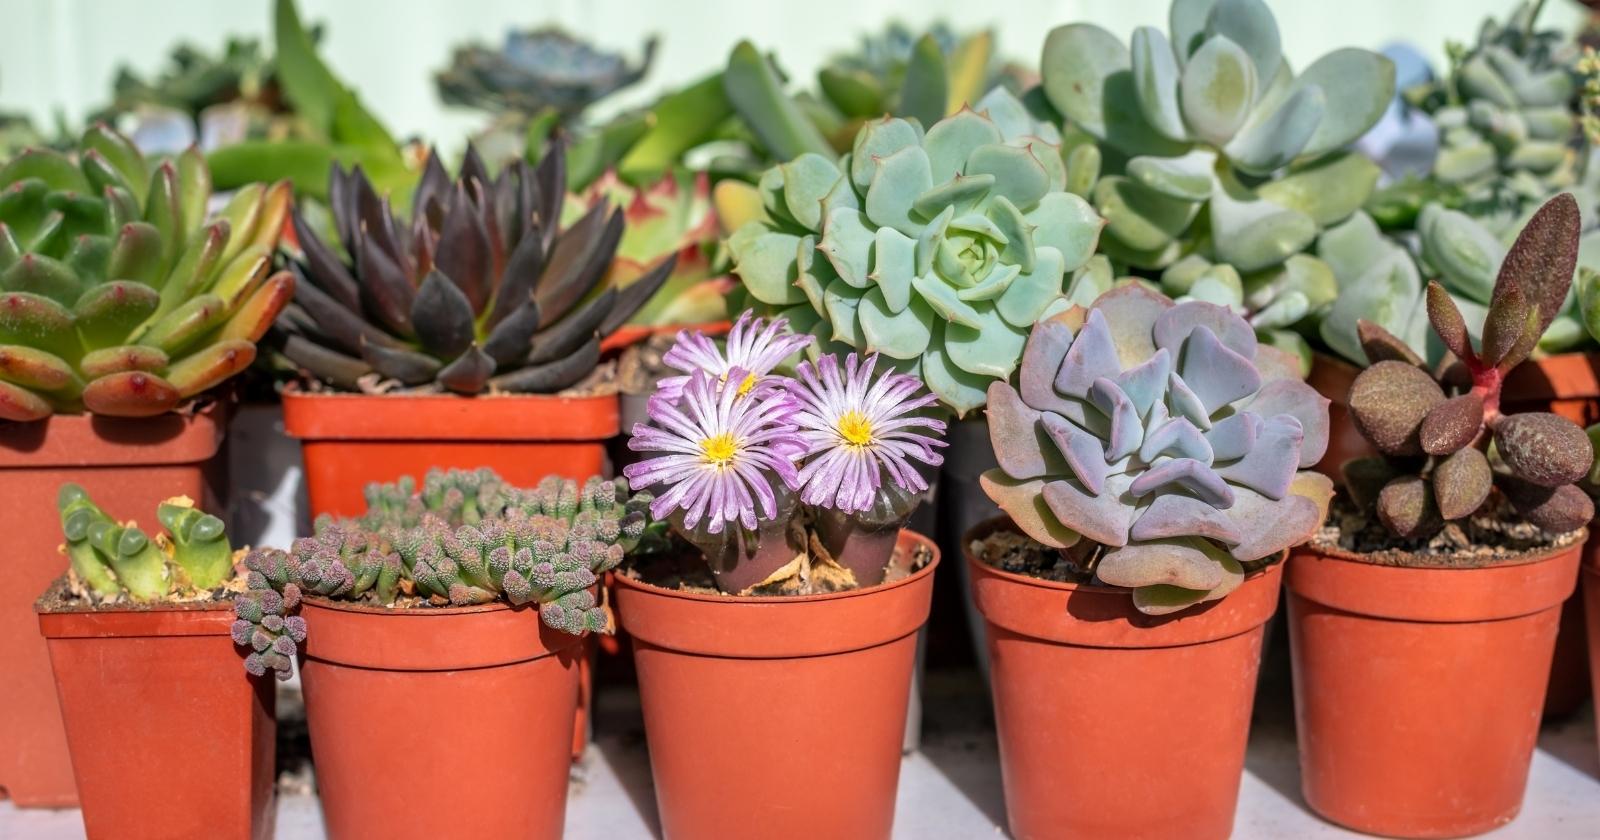 Different Types of Succulents Growing Together on a Table